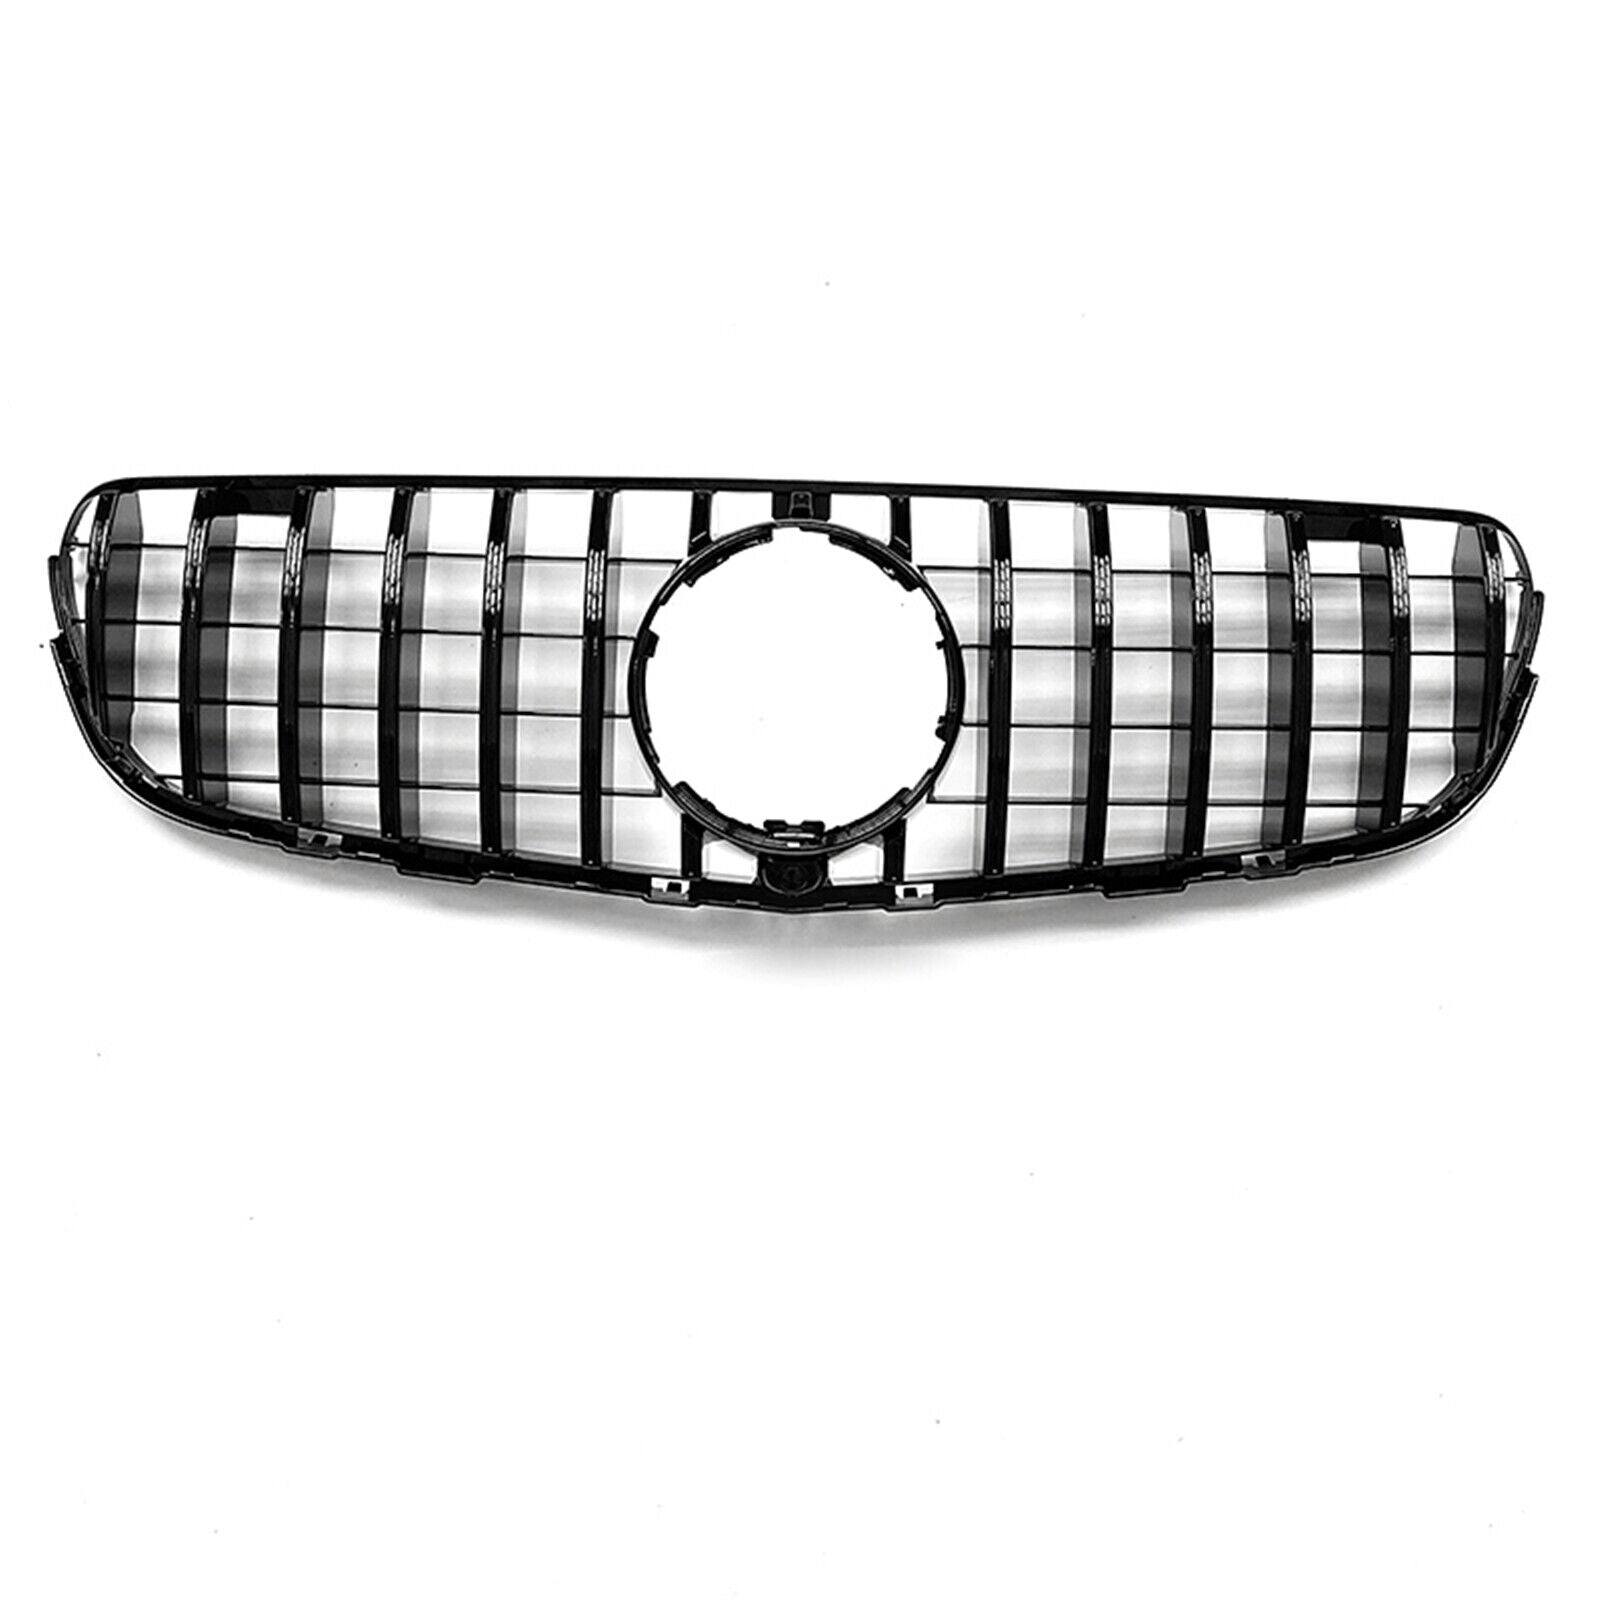 AMG Panamericana Front Grill to suit Mercedes Benz GLC X253/C253 15-19